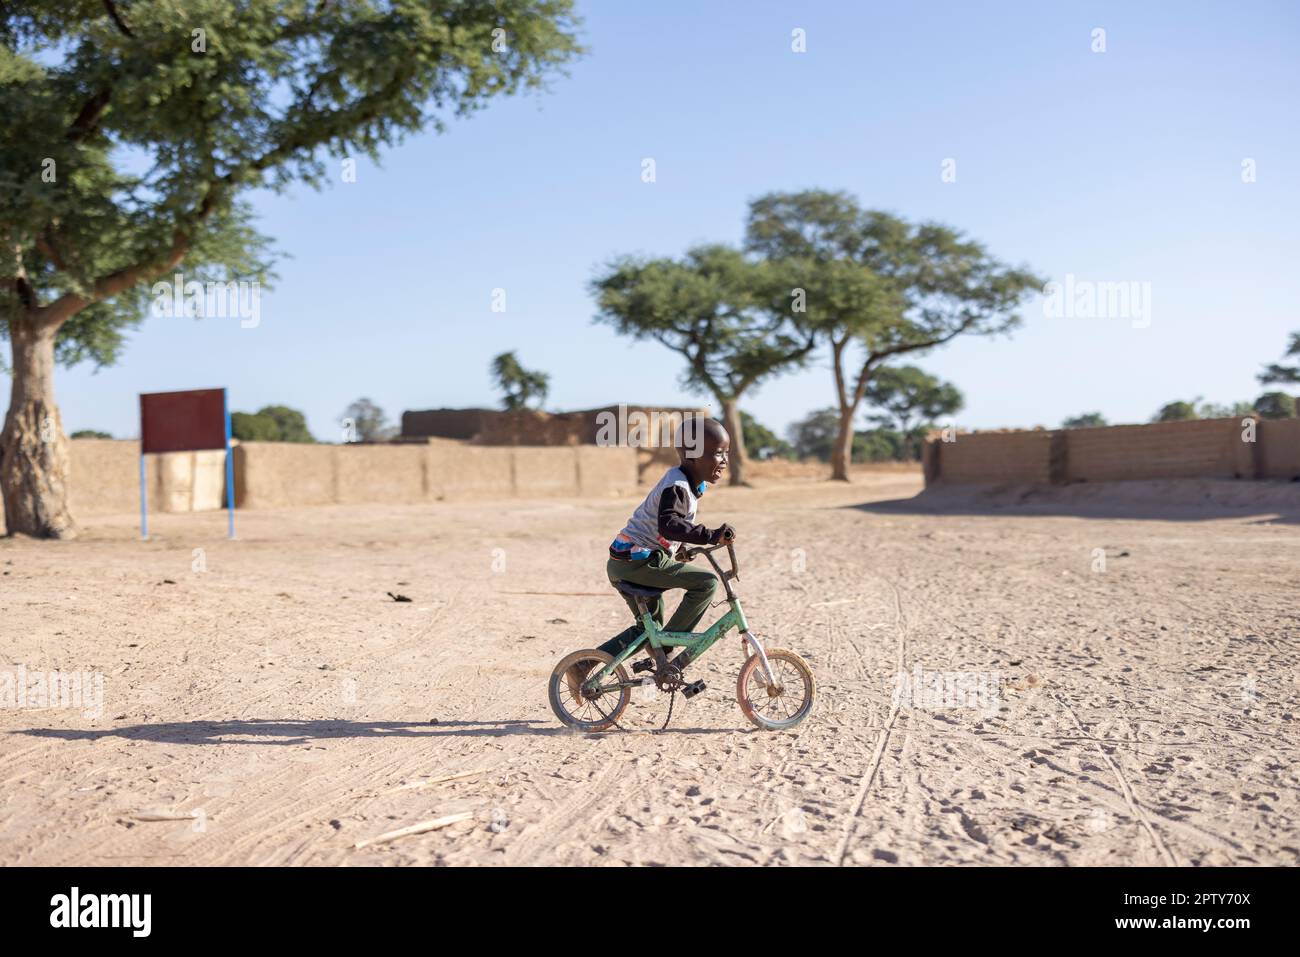 A young boy rides his bicycle on a sandy road in his village in rural Segou Region, Mali, West Africa. 2022 Mali drought and hunger crisis. Stock Photo